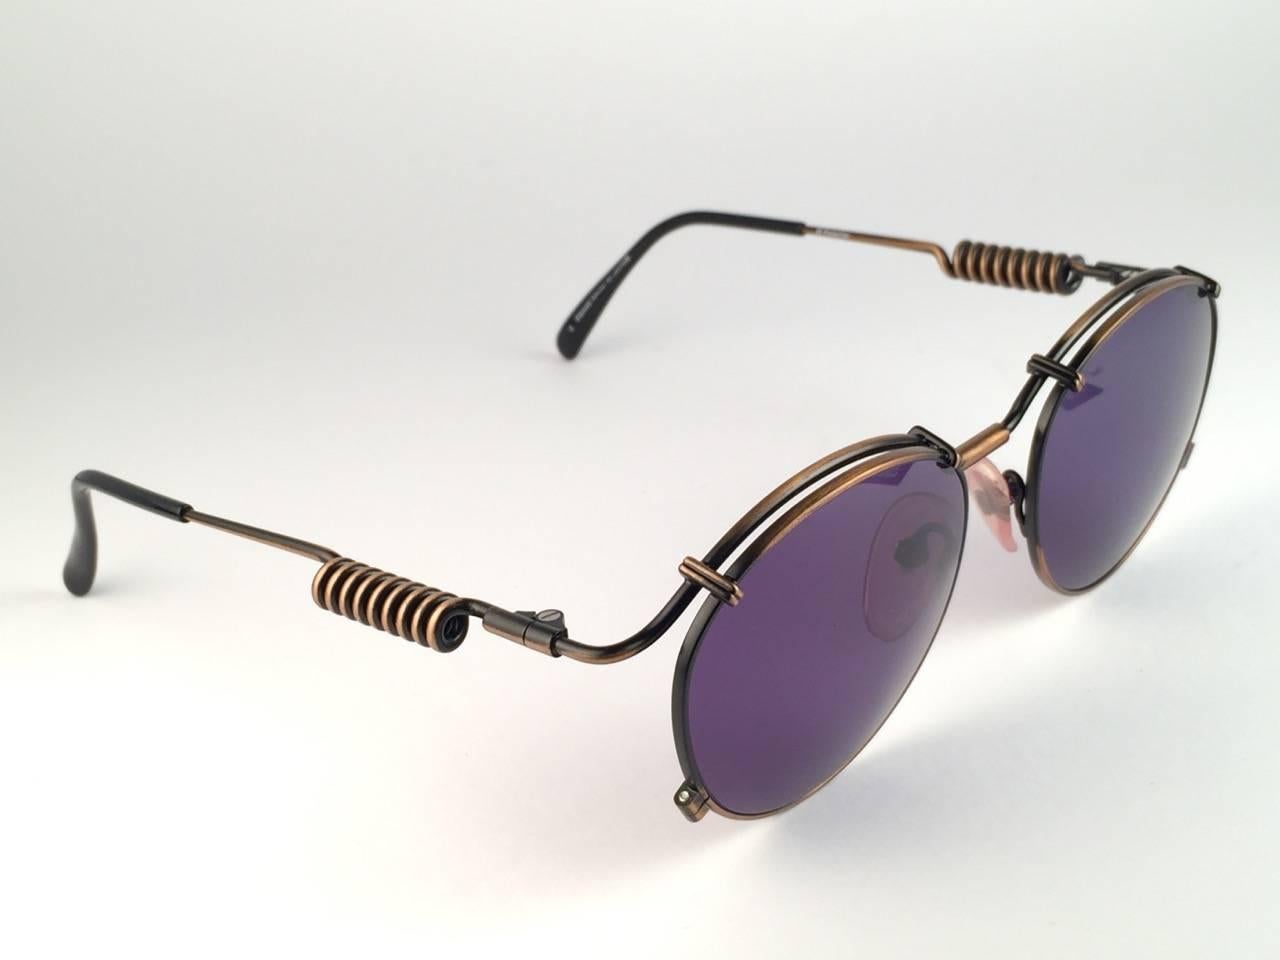 
New Jean Paul Gaultier 56 9174 Black & Copper Details frame. 
Dark Blue lenses that complete a ready to wear JPG look.

Amazing design with strong yet intricate details.
Design and produced in the 1900's.
New, never worn or displayed.
A true